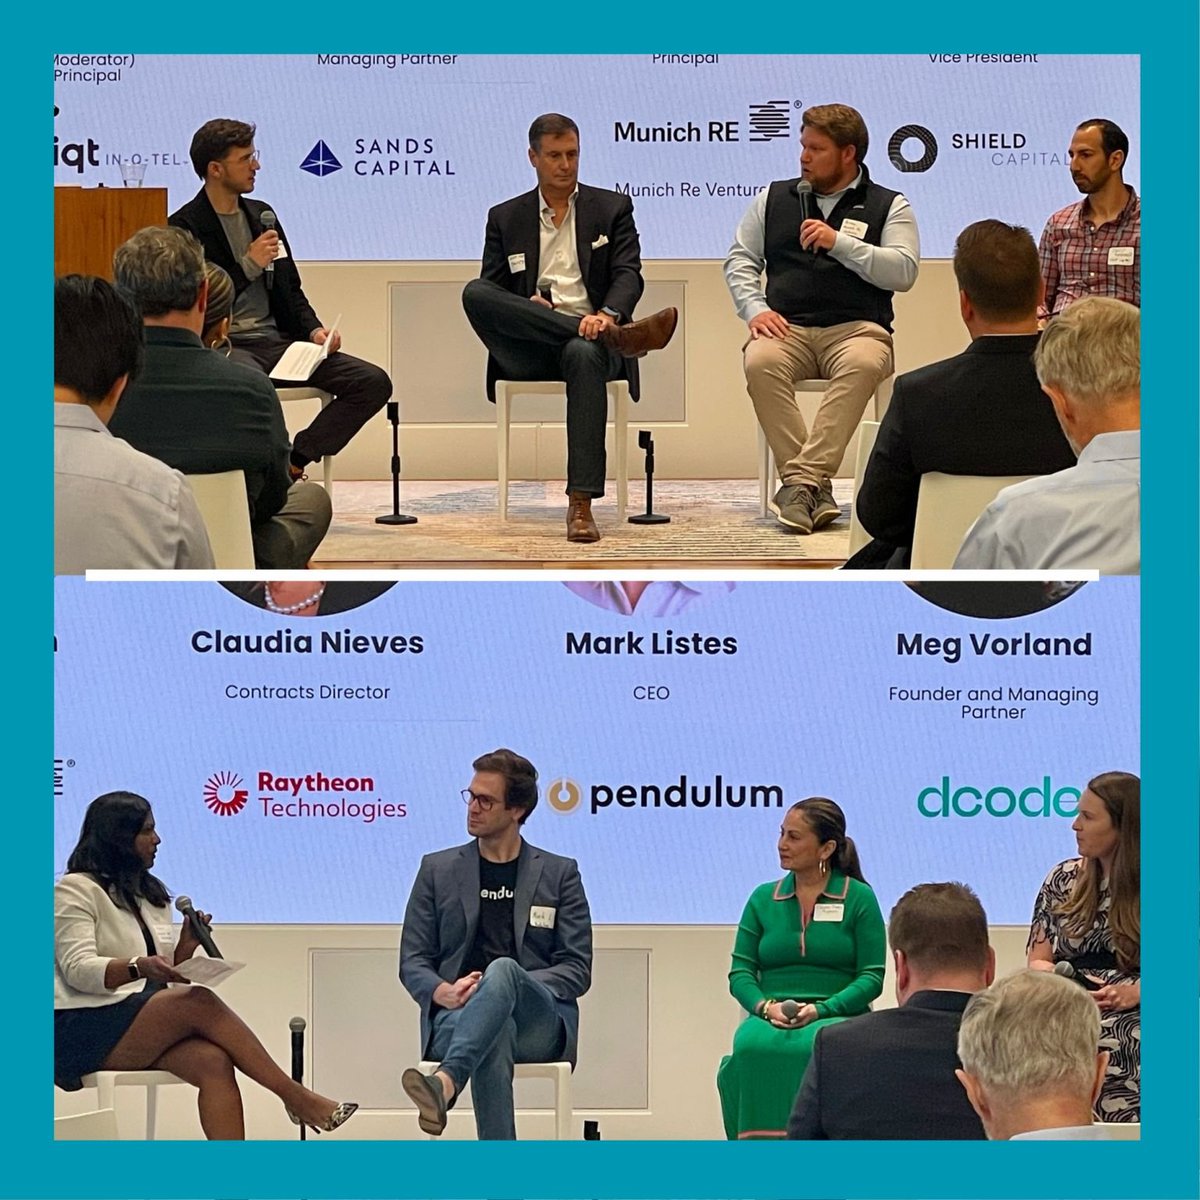 in DC 🇺🇸 last week talking hot takes on defense tech dual use why, when, and how to pursue 🗽USG🏛 non-dilutive capital sources harder to find alpha in defense tech today, but even more momentum coming Rothzeid @ShieldCapVC | Pennington @MunichReVC | Frederick @ Sands Capital